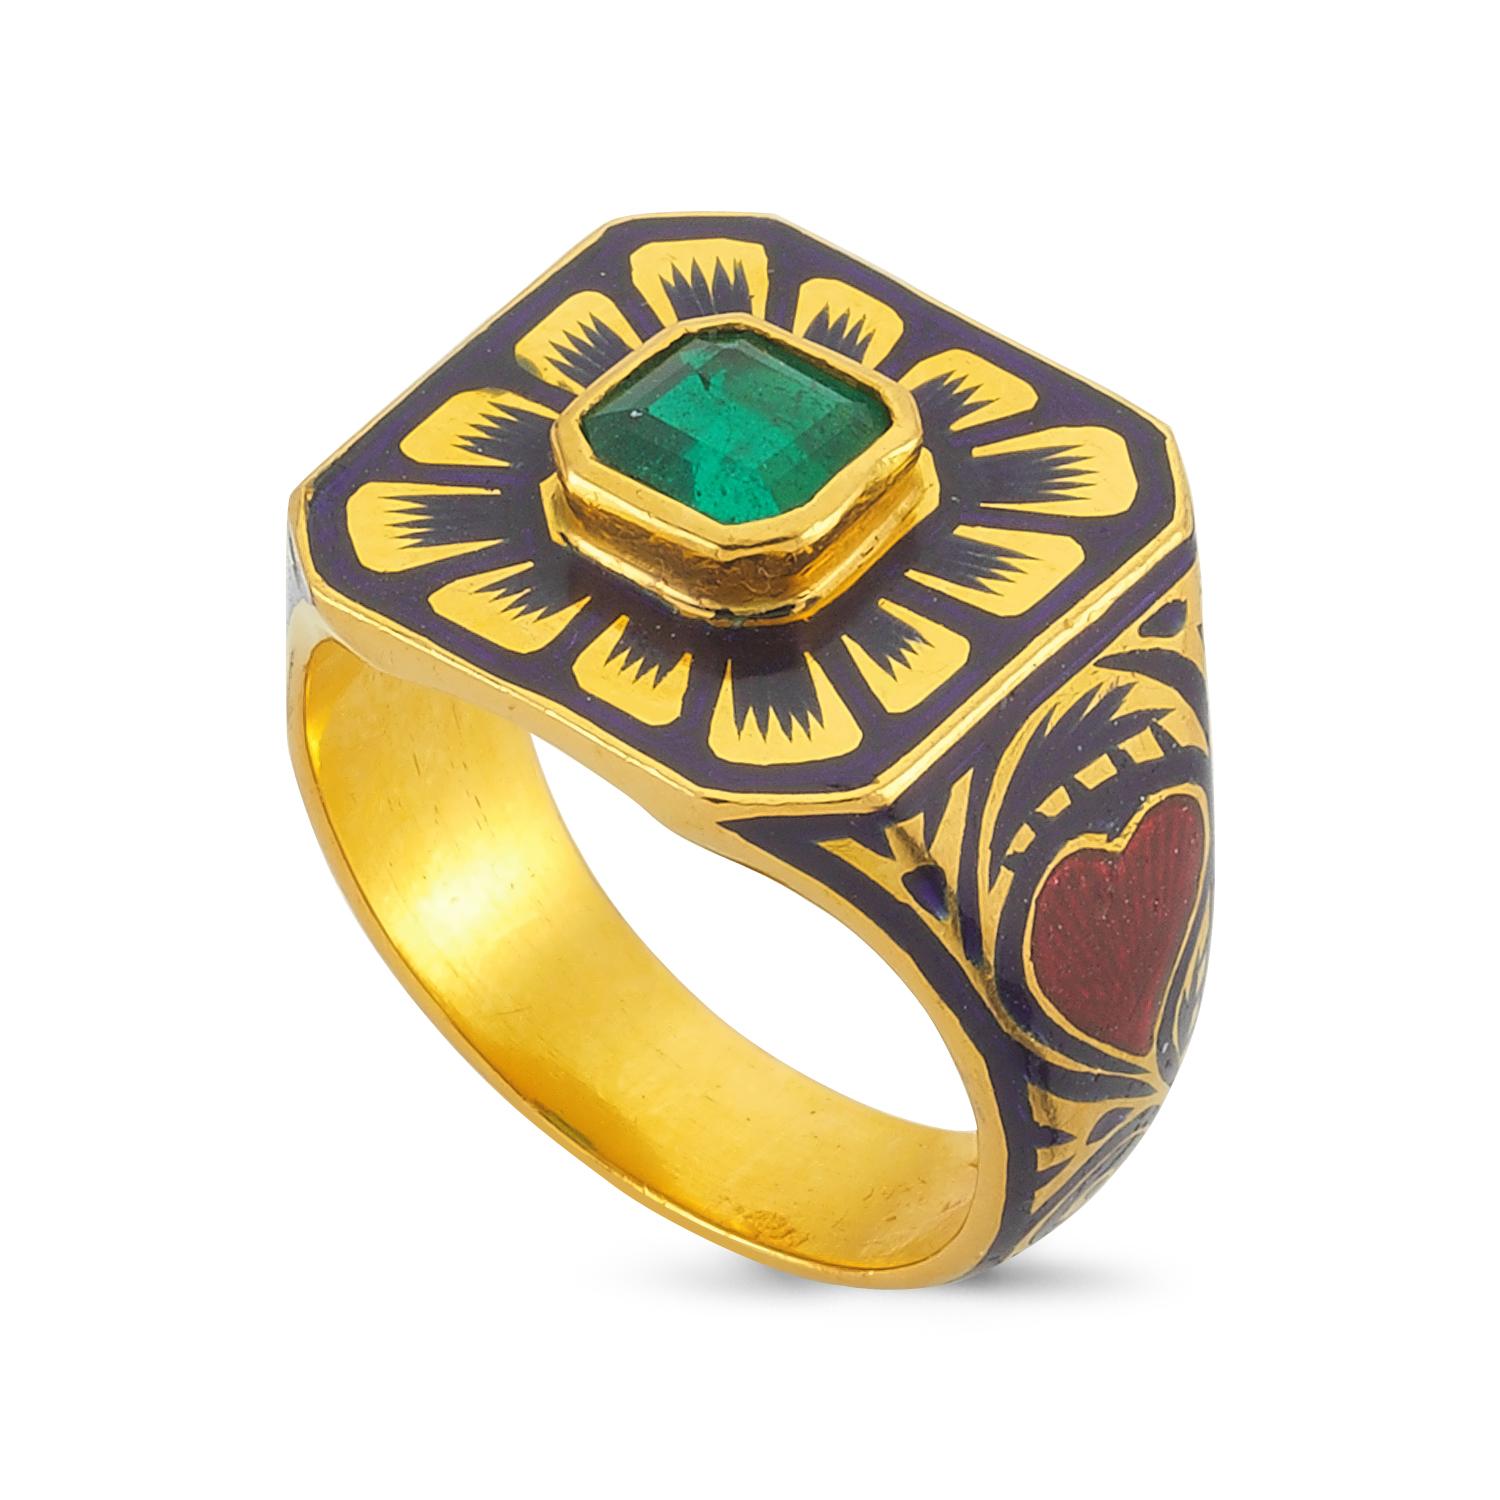 The Arka flowers blooms in the Rajasthani Desert after the monsoon rains. It opens its intricate dark petals, to reveal a green centre, which on the Arka Ring is set with a glowing emerald. To enhance the traditional Vedic properties of the ring,